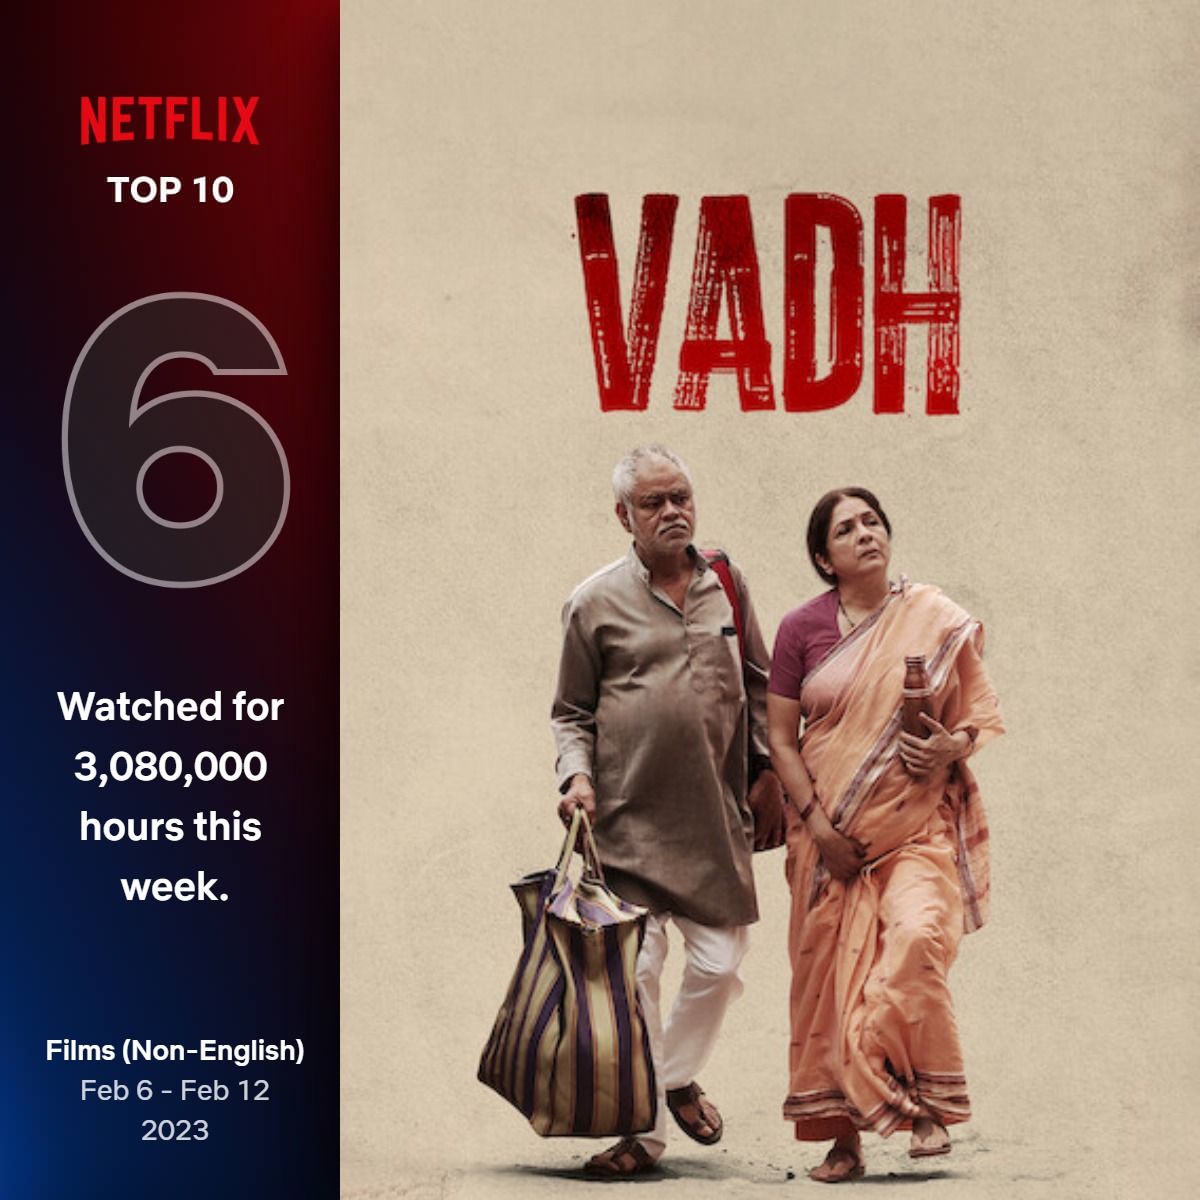 #Vadh is among the Top 10 Most-Watched Non-English Films on Netflix GLOBALLY in the past week. Written and directed by Jaspal Singh Sandhu and Rajeev Barnwal, and starring #SanjayMishra, #NeenaGupta, #SaurabhSachdeva and #ManavVij. #VadhOnNetflix @LuvFilms @J_Studio_